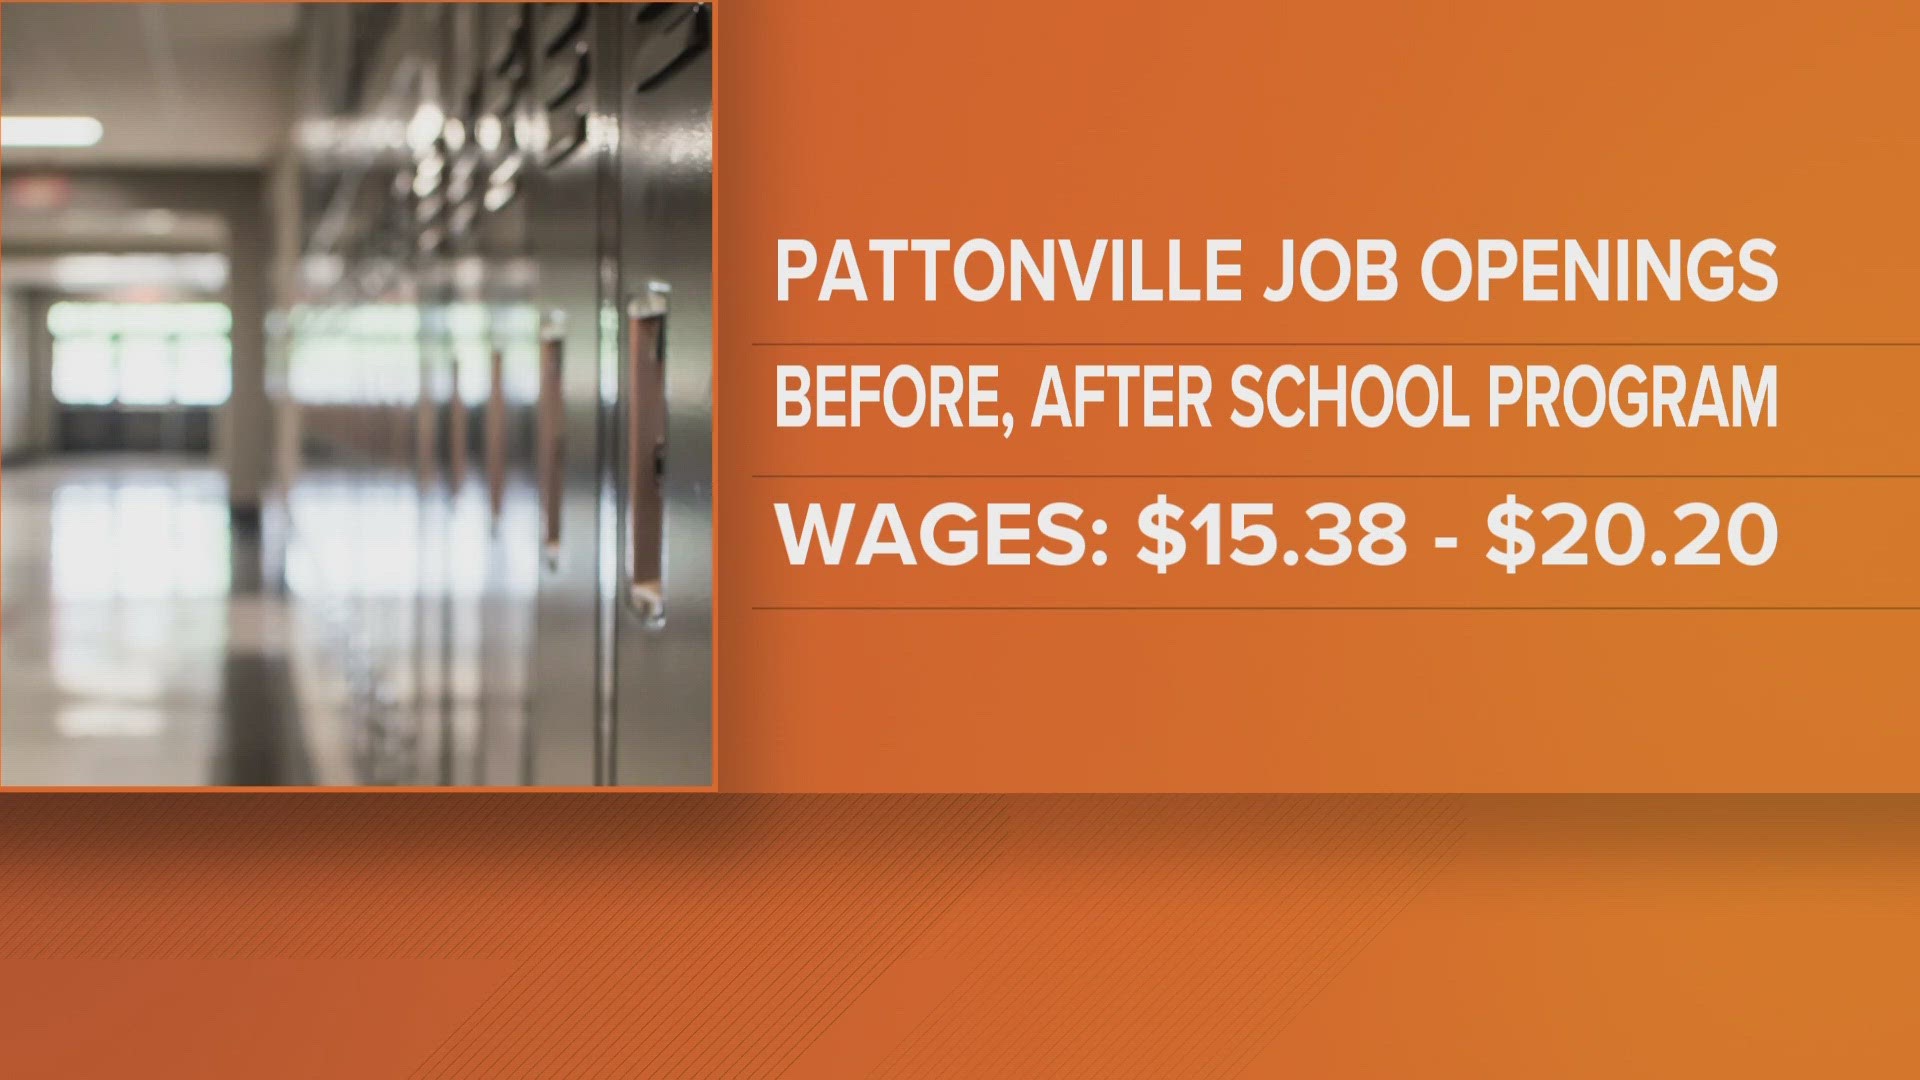 According to the listing on the department's website, the jobs are nine-and-a-half month per year positions working with students from kindergarten to fifth grade.